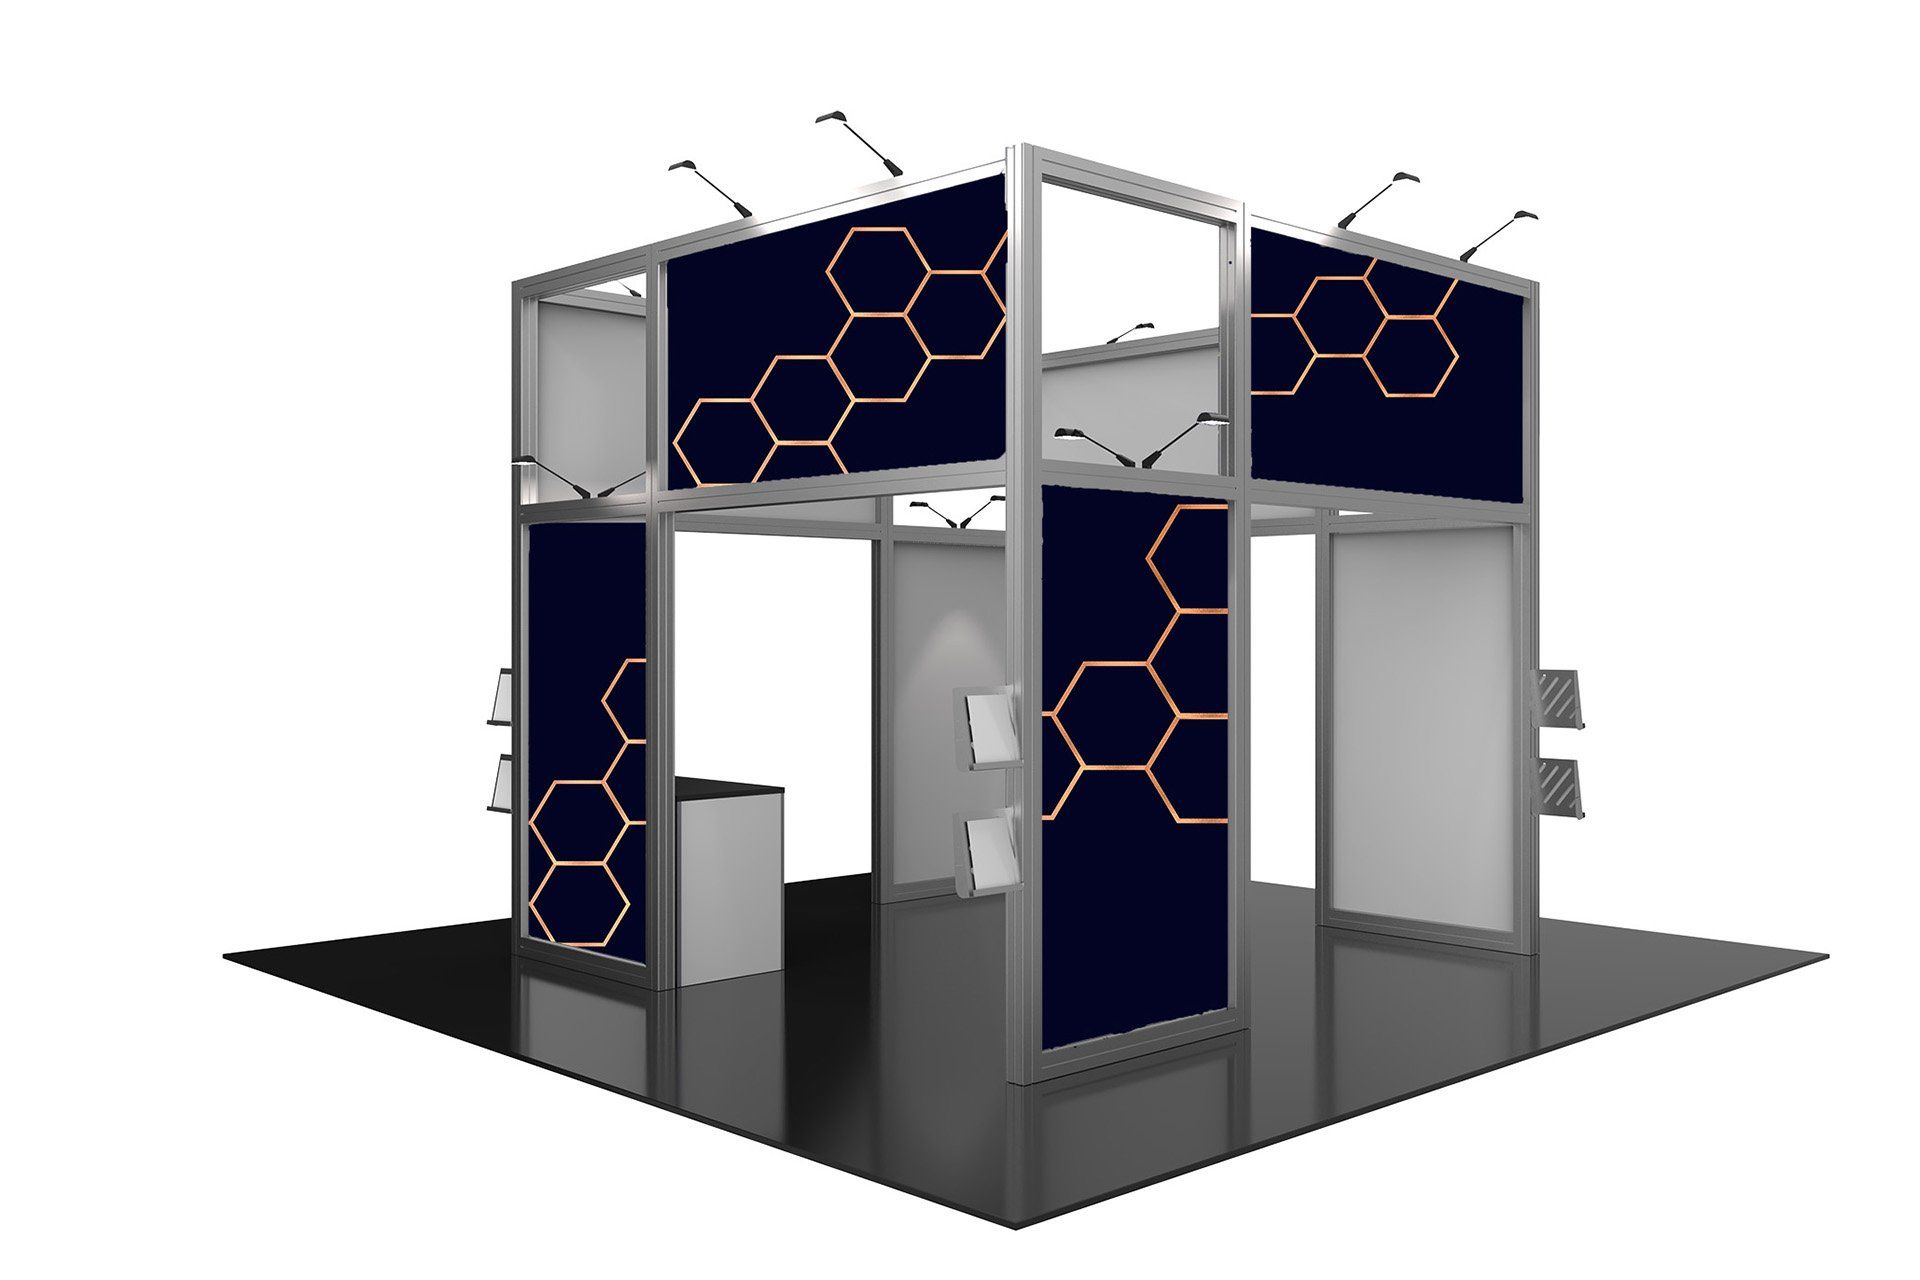 Modular Trade Show Display for a 20x20 Booth